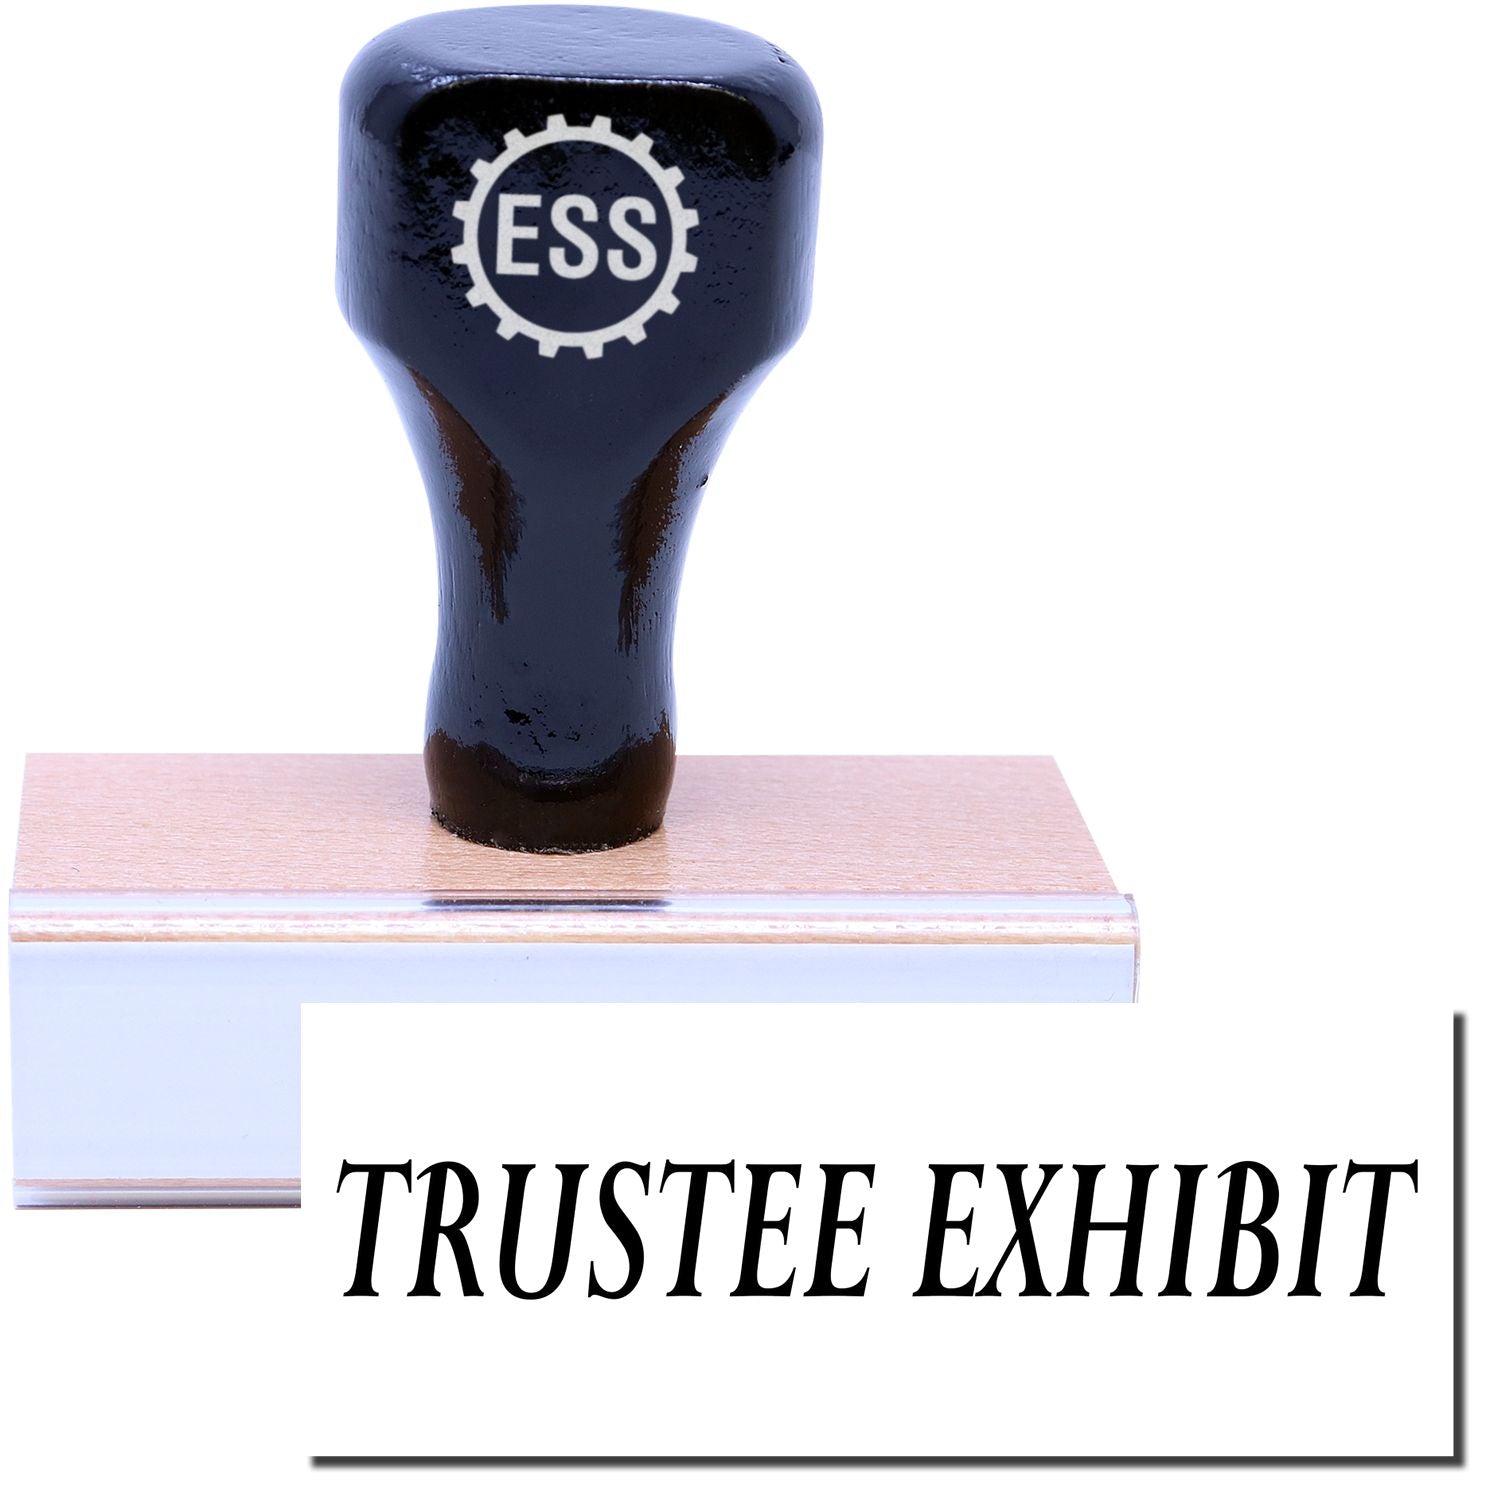 A stock office rubber stamp with a stamped image showing how the text "TRUSTEE EXHIBIT" in a large font is displayed after stamping.